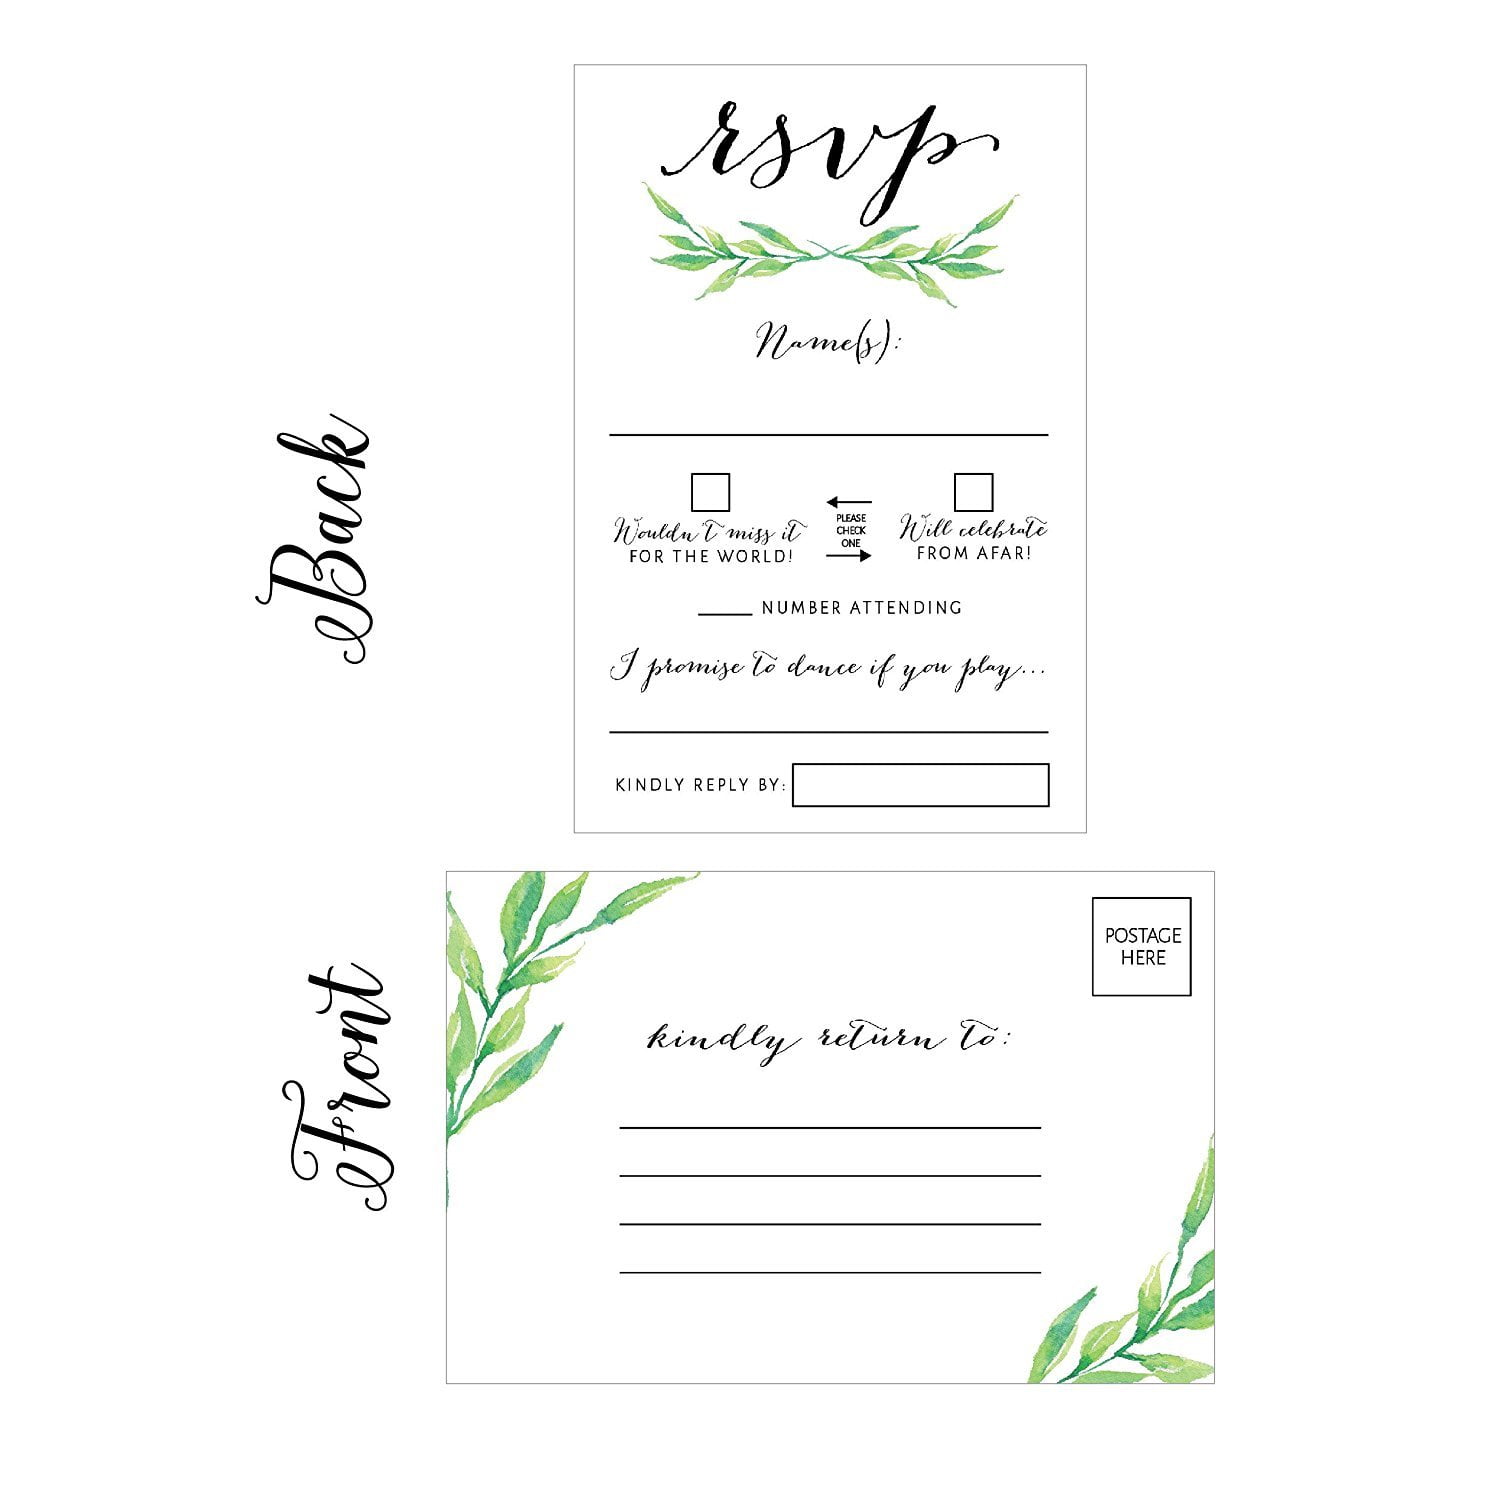 50 invites with envelopes Engagement Invitation Cards 